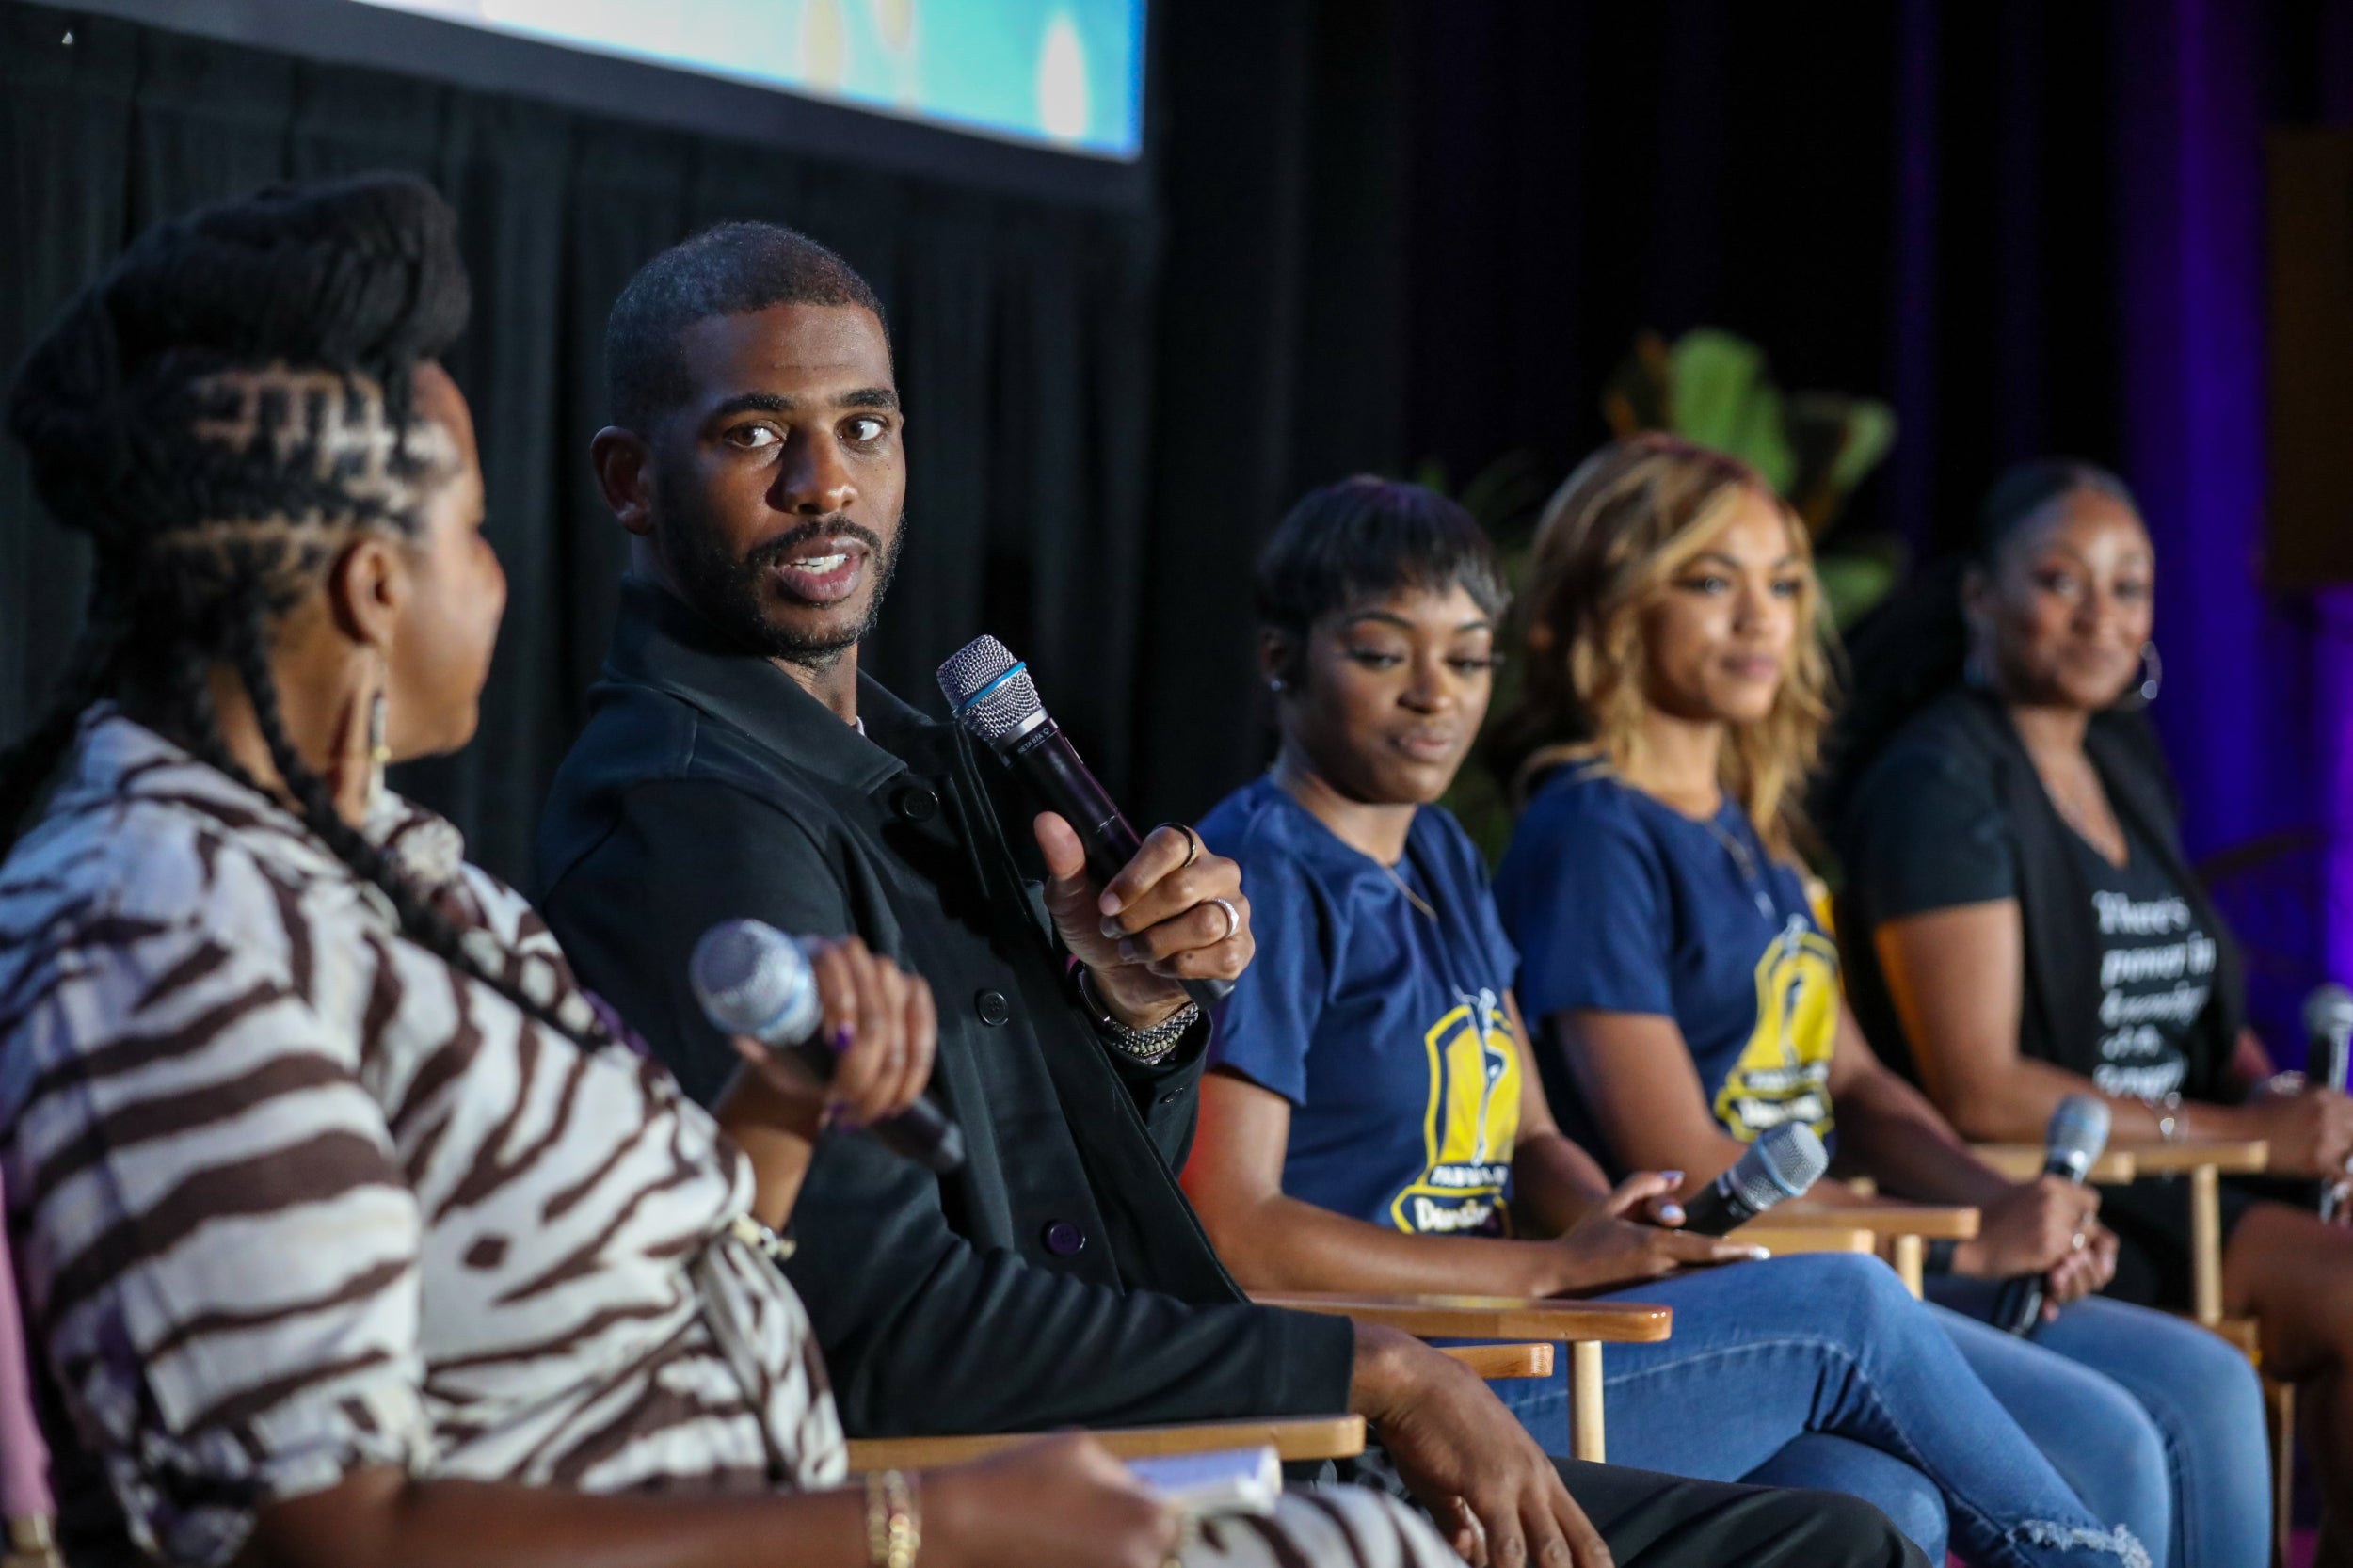 ‘Why Not Us: Southern Dance’ Expands On The Tradition Of HBCU Culture At The ESSENCE Film Festival